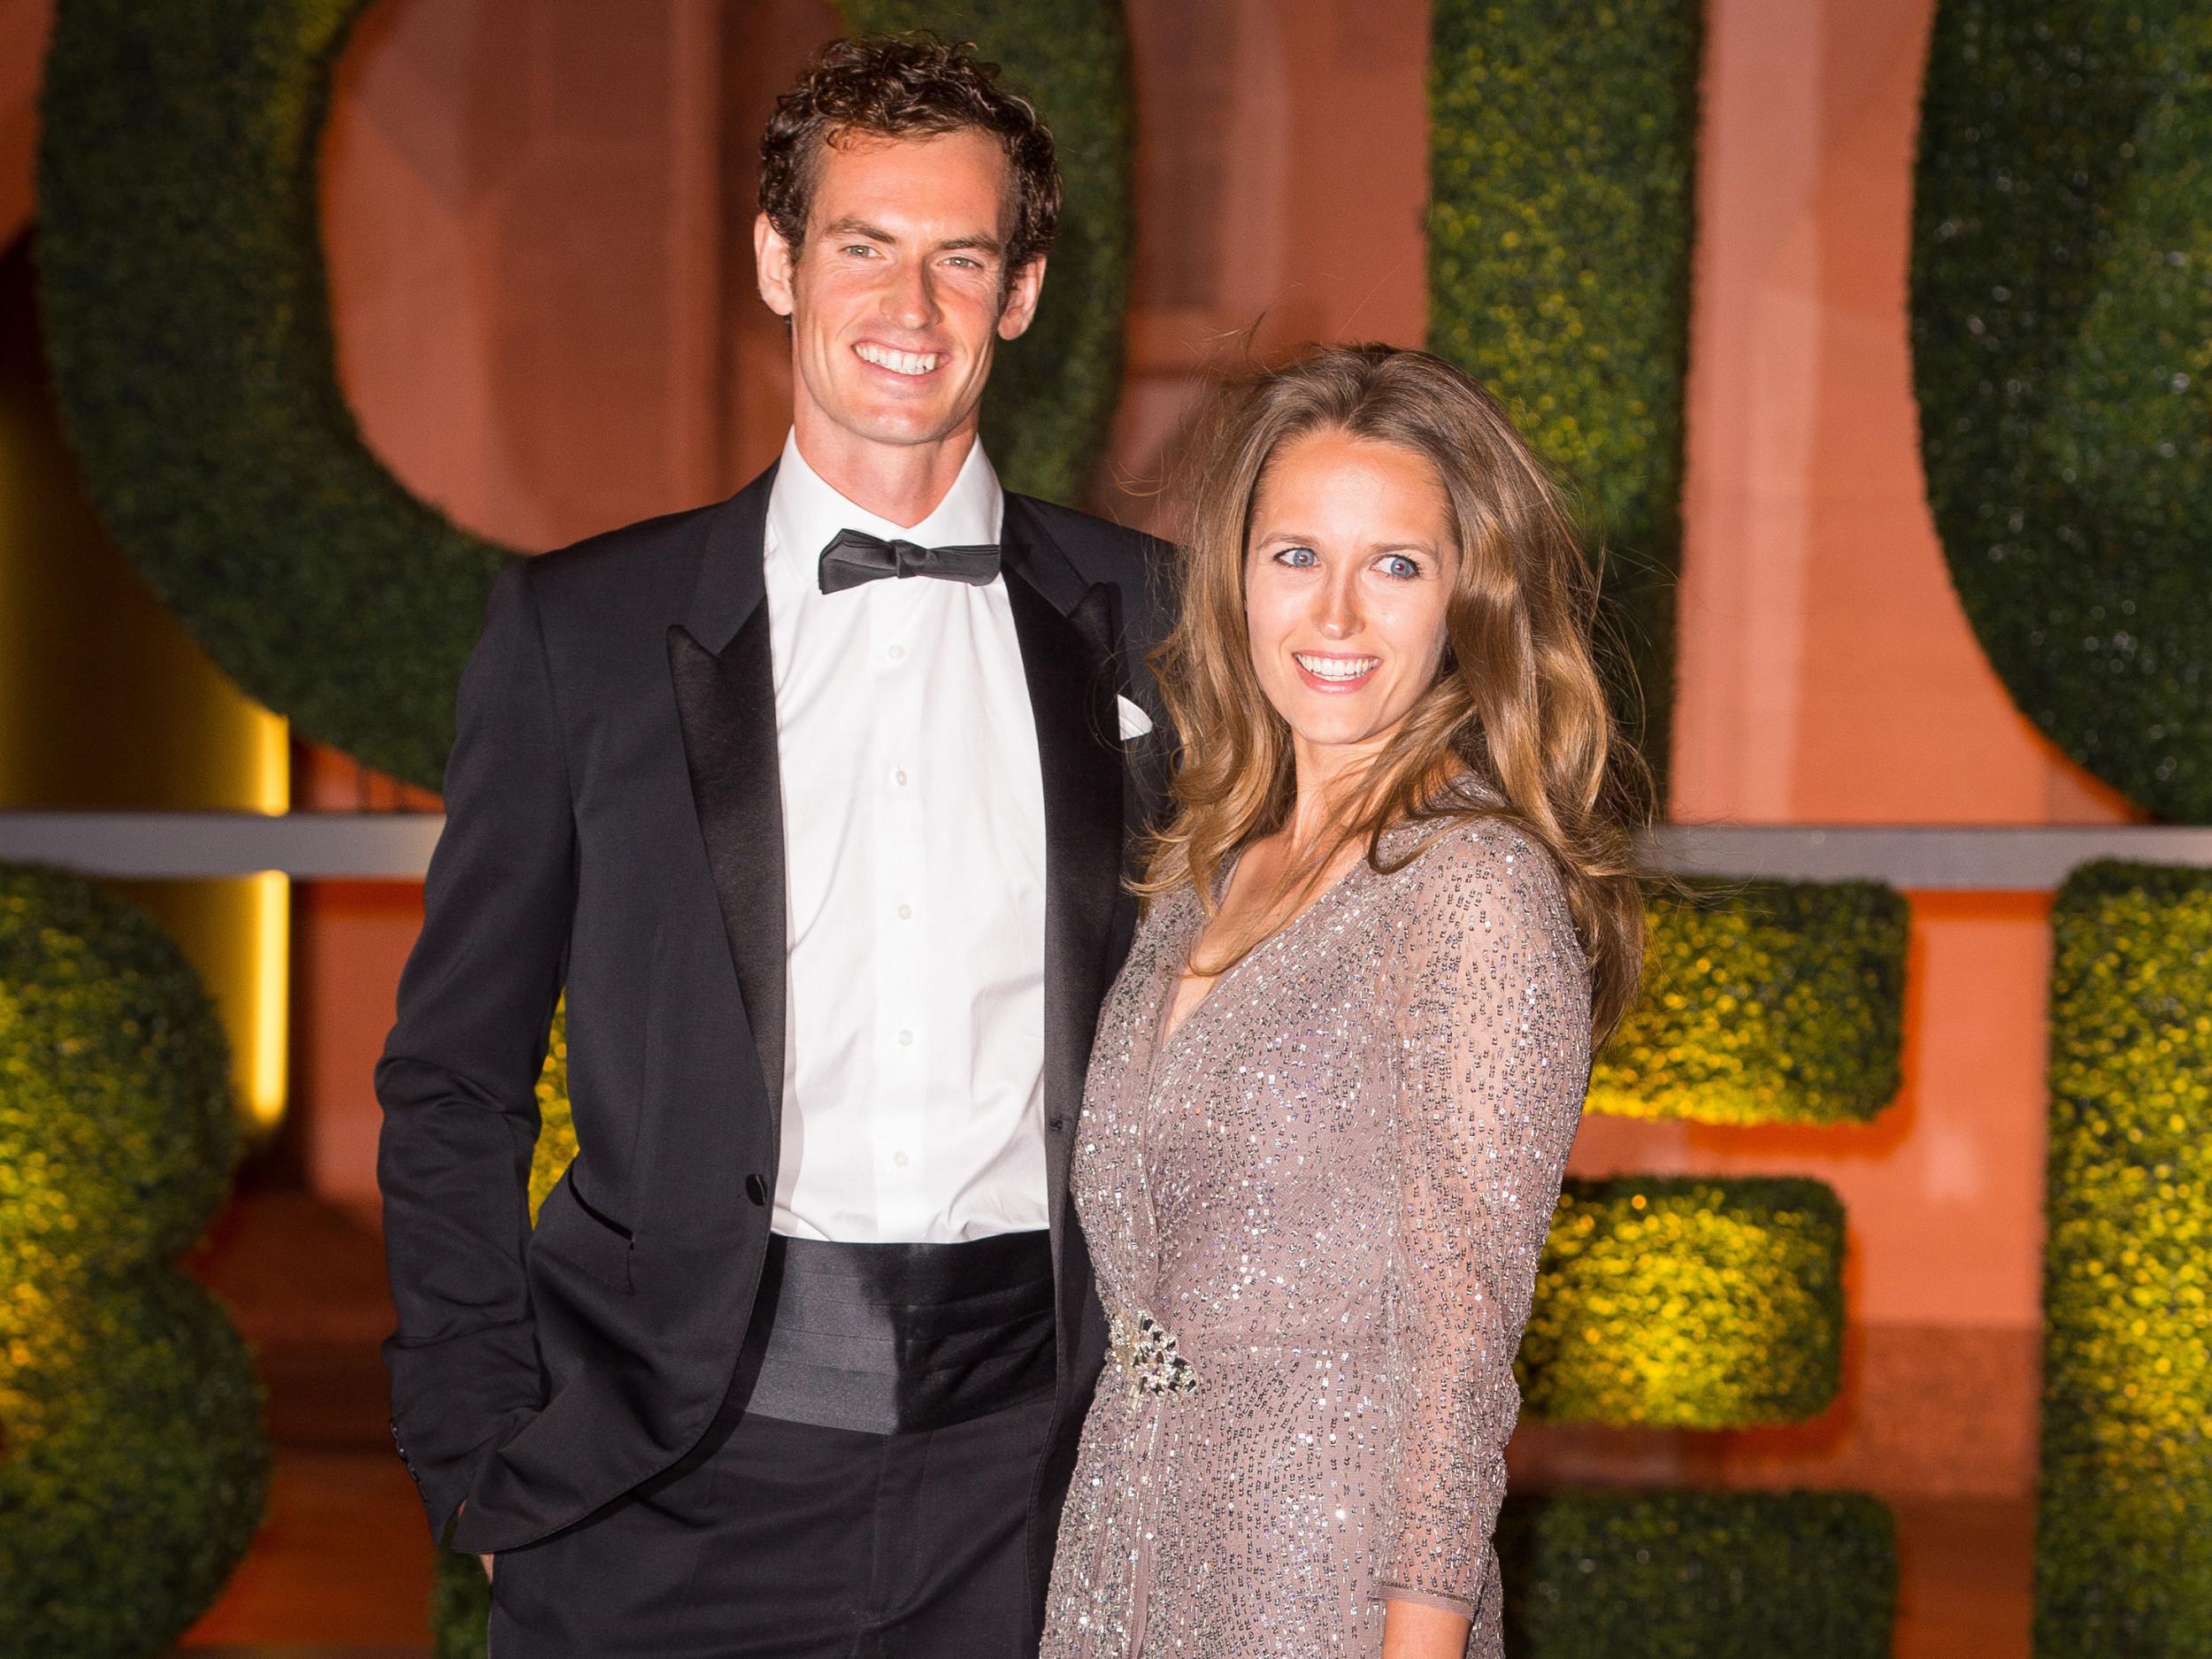 Sir Andy Murray and his wife Kim, who has given birth to their second daughter